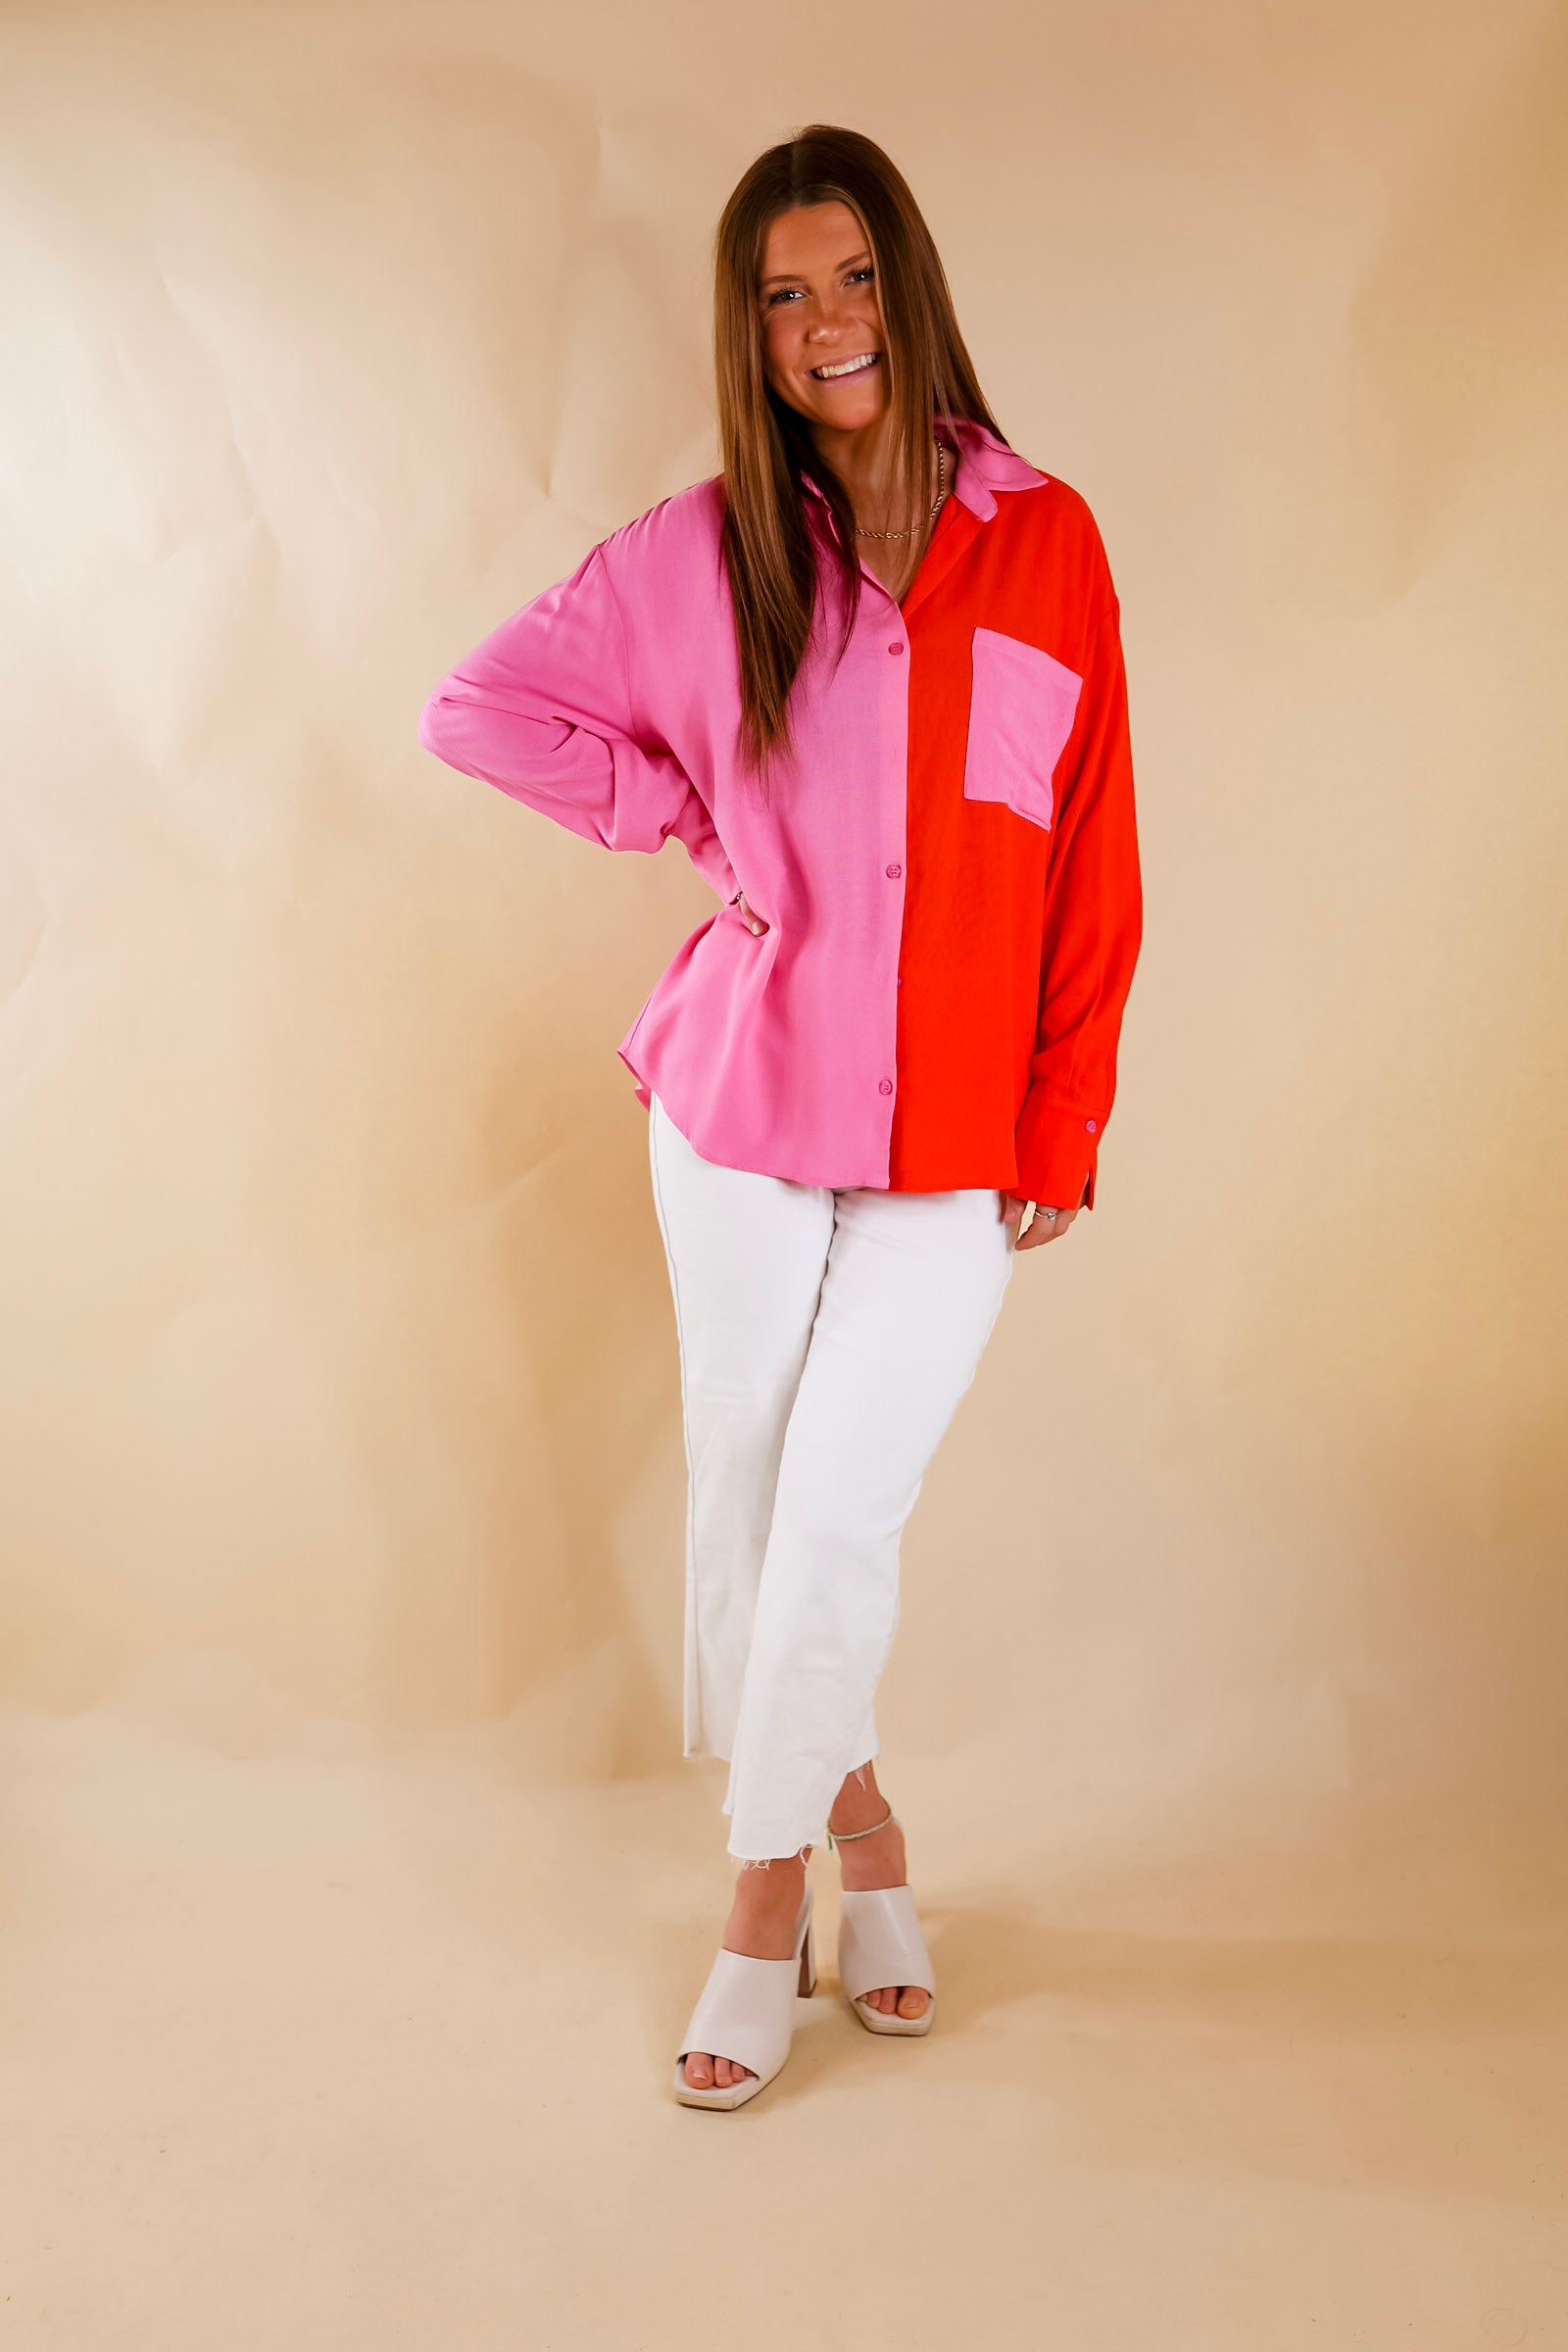 Play It Up Color Block Button Up Top in Pink and Red - Giddy Up Glamour Boutique